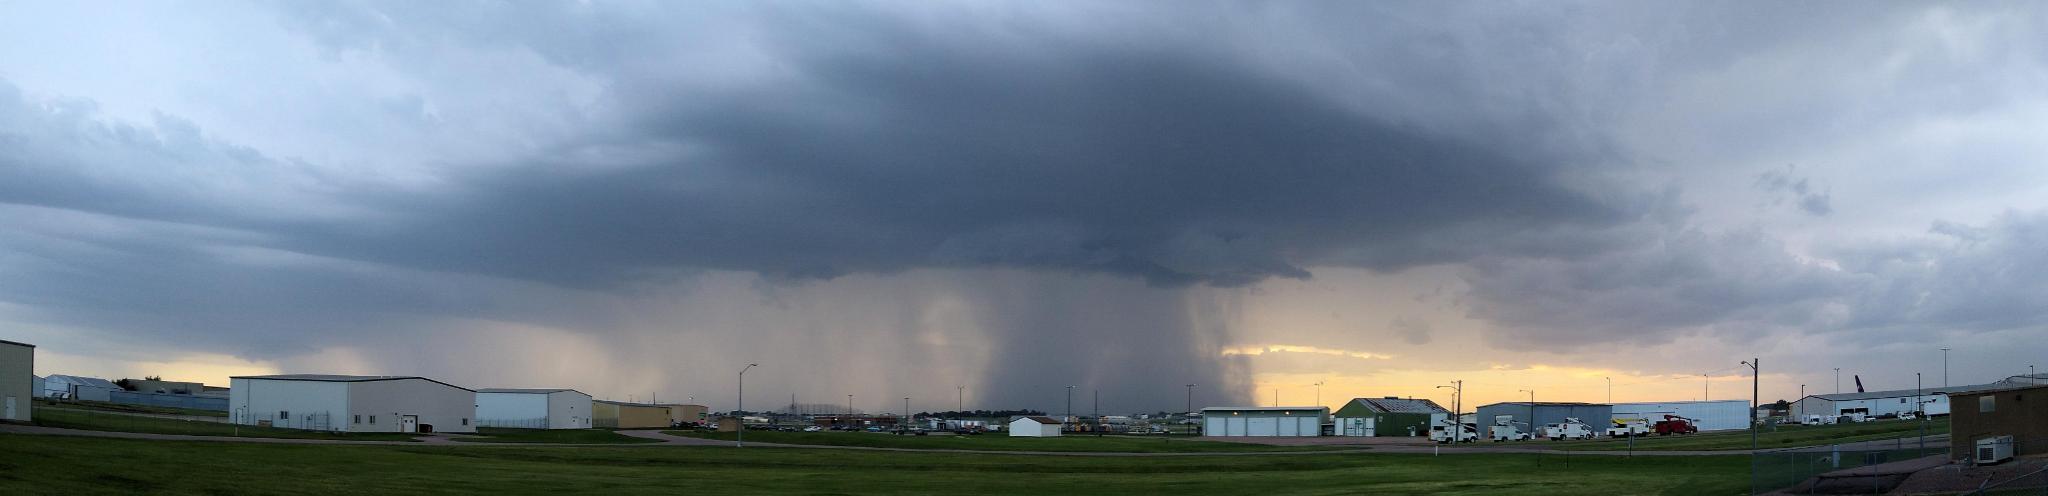 Severe thunderstorm approaching the Sioux Falls Airport, ​where 82 mph wind gusts were later recorded.